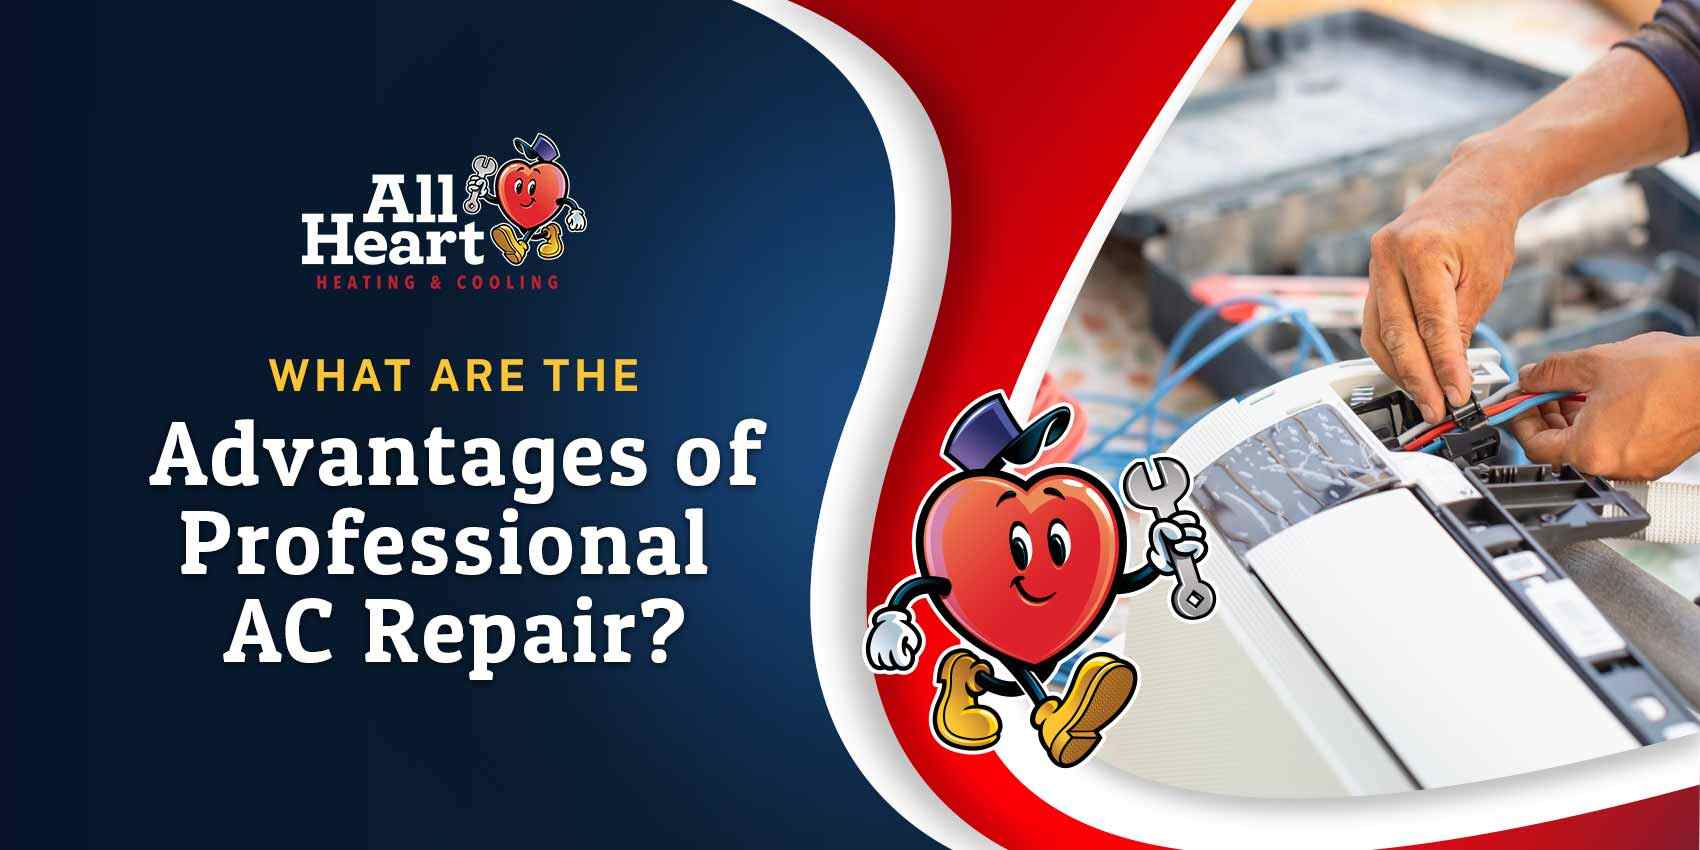 AllHeart-BlogPost-What-are-the-advantages-of-professional-ac-repair